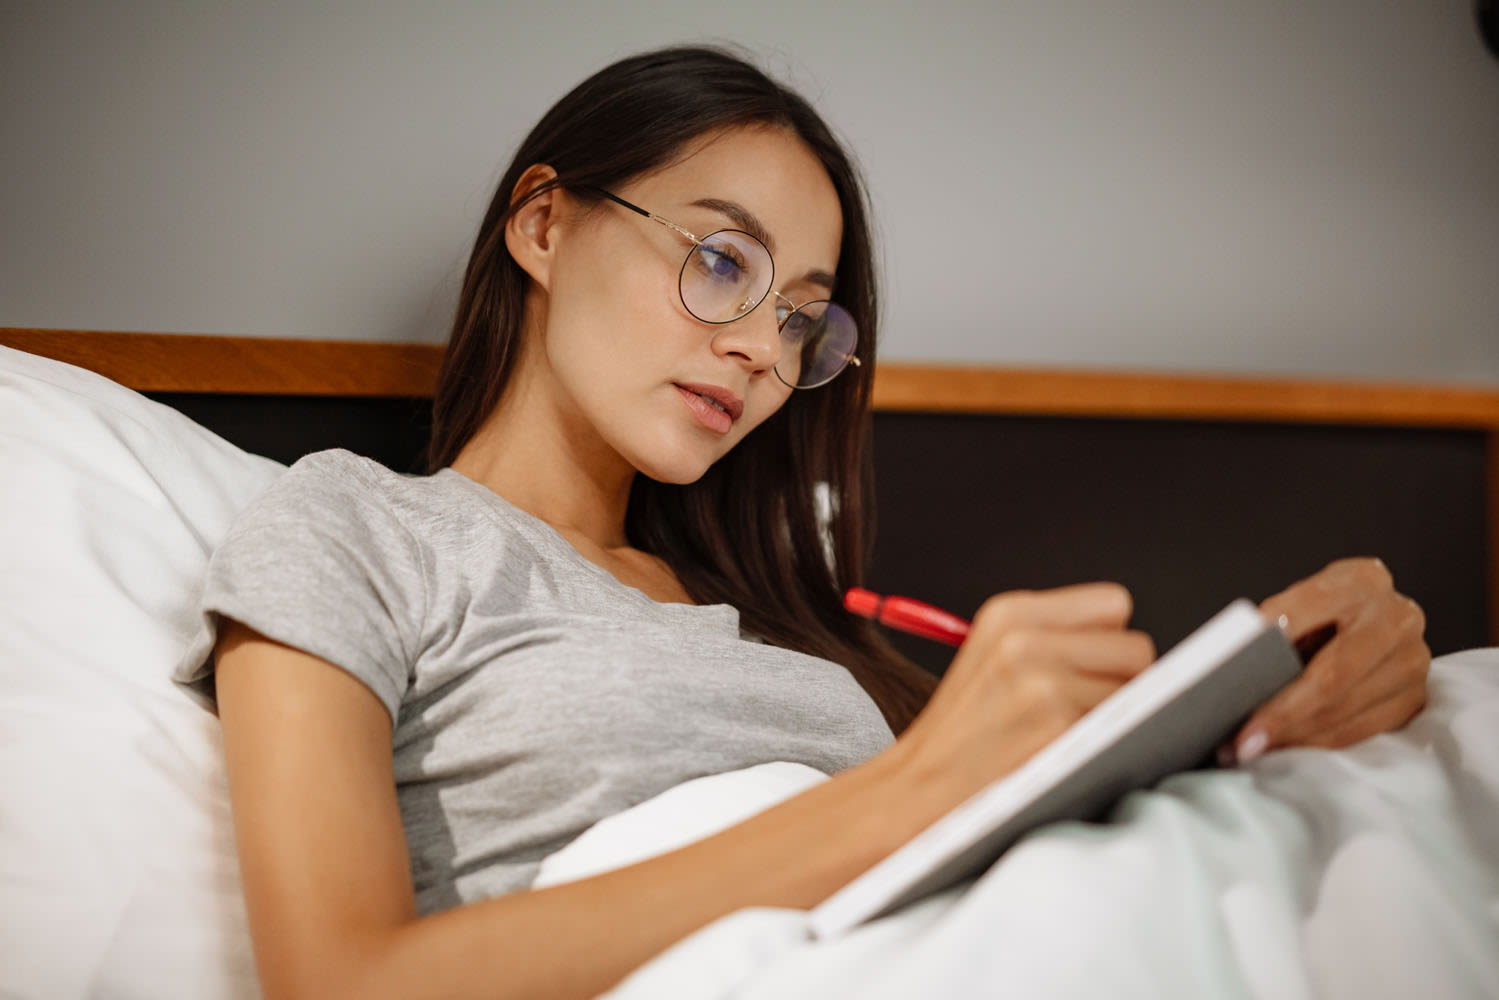 A woman sitting in bed, writing in a journal